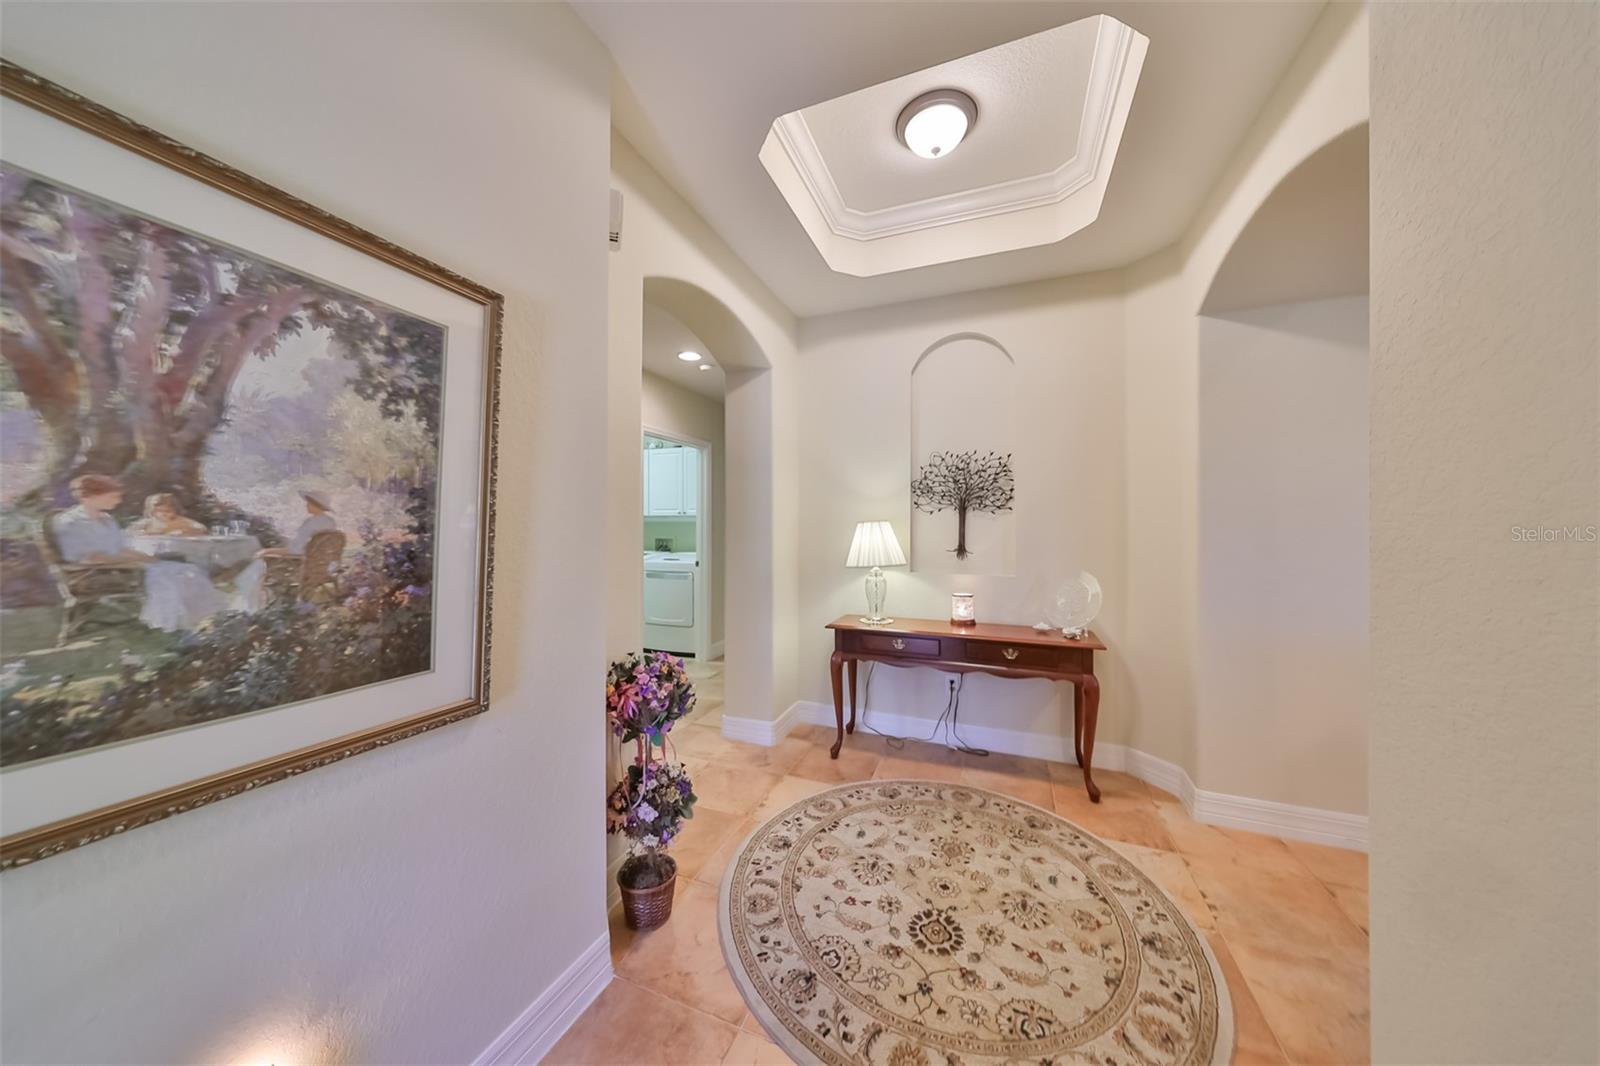 Inviting foyer entrance into this home has elegant neutral tones, tray ceilings and architectural niches.